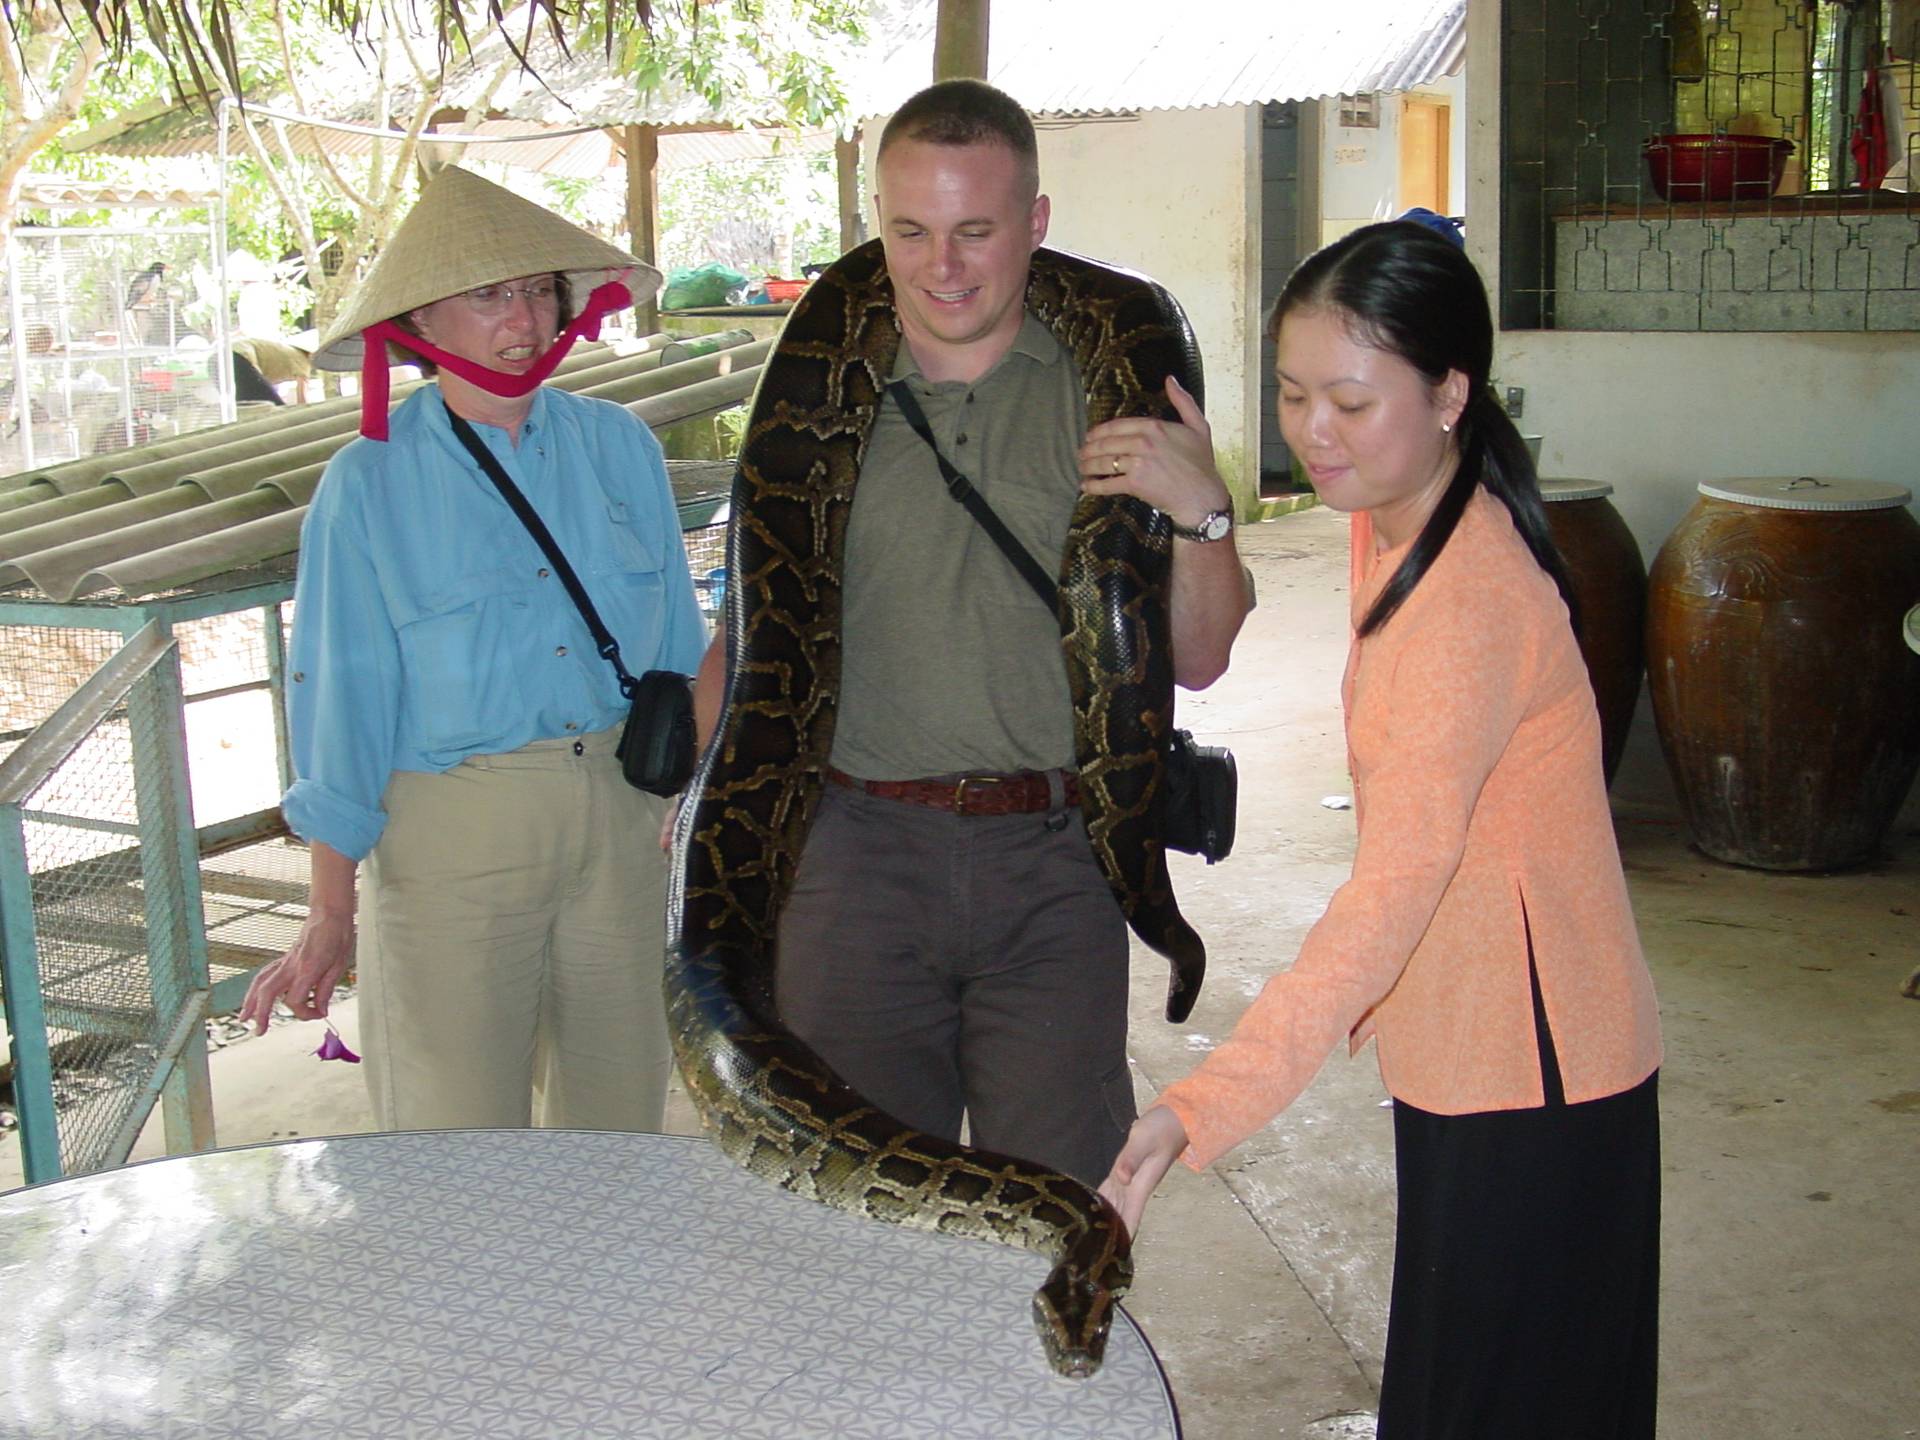 Young man with a large snake around his shoulders. Older American woman in Vietnamese straw hat and young female snake handler stand next to him.